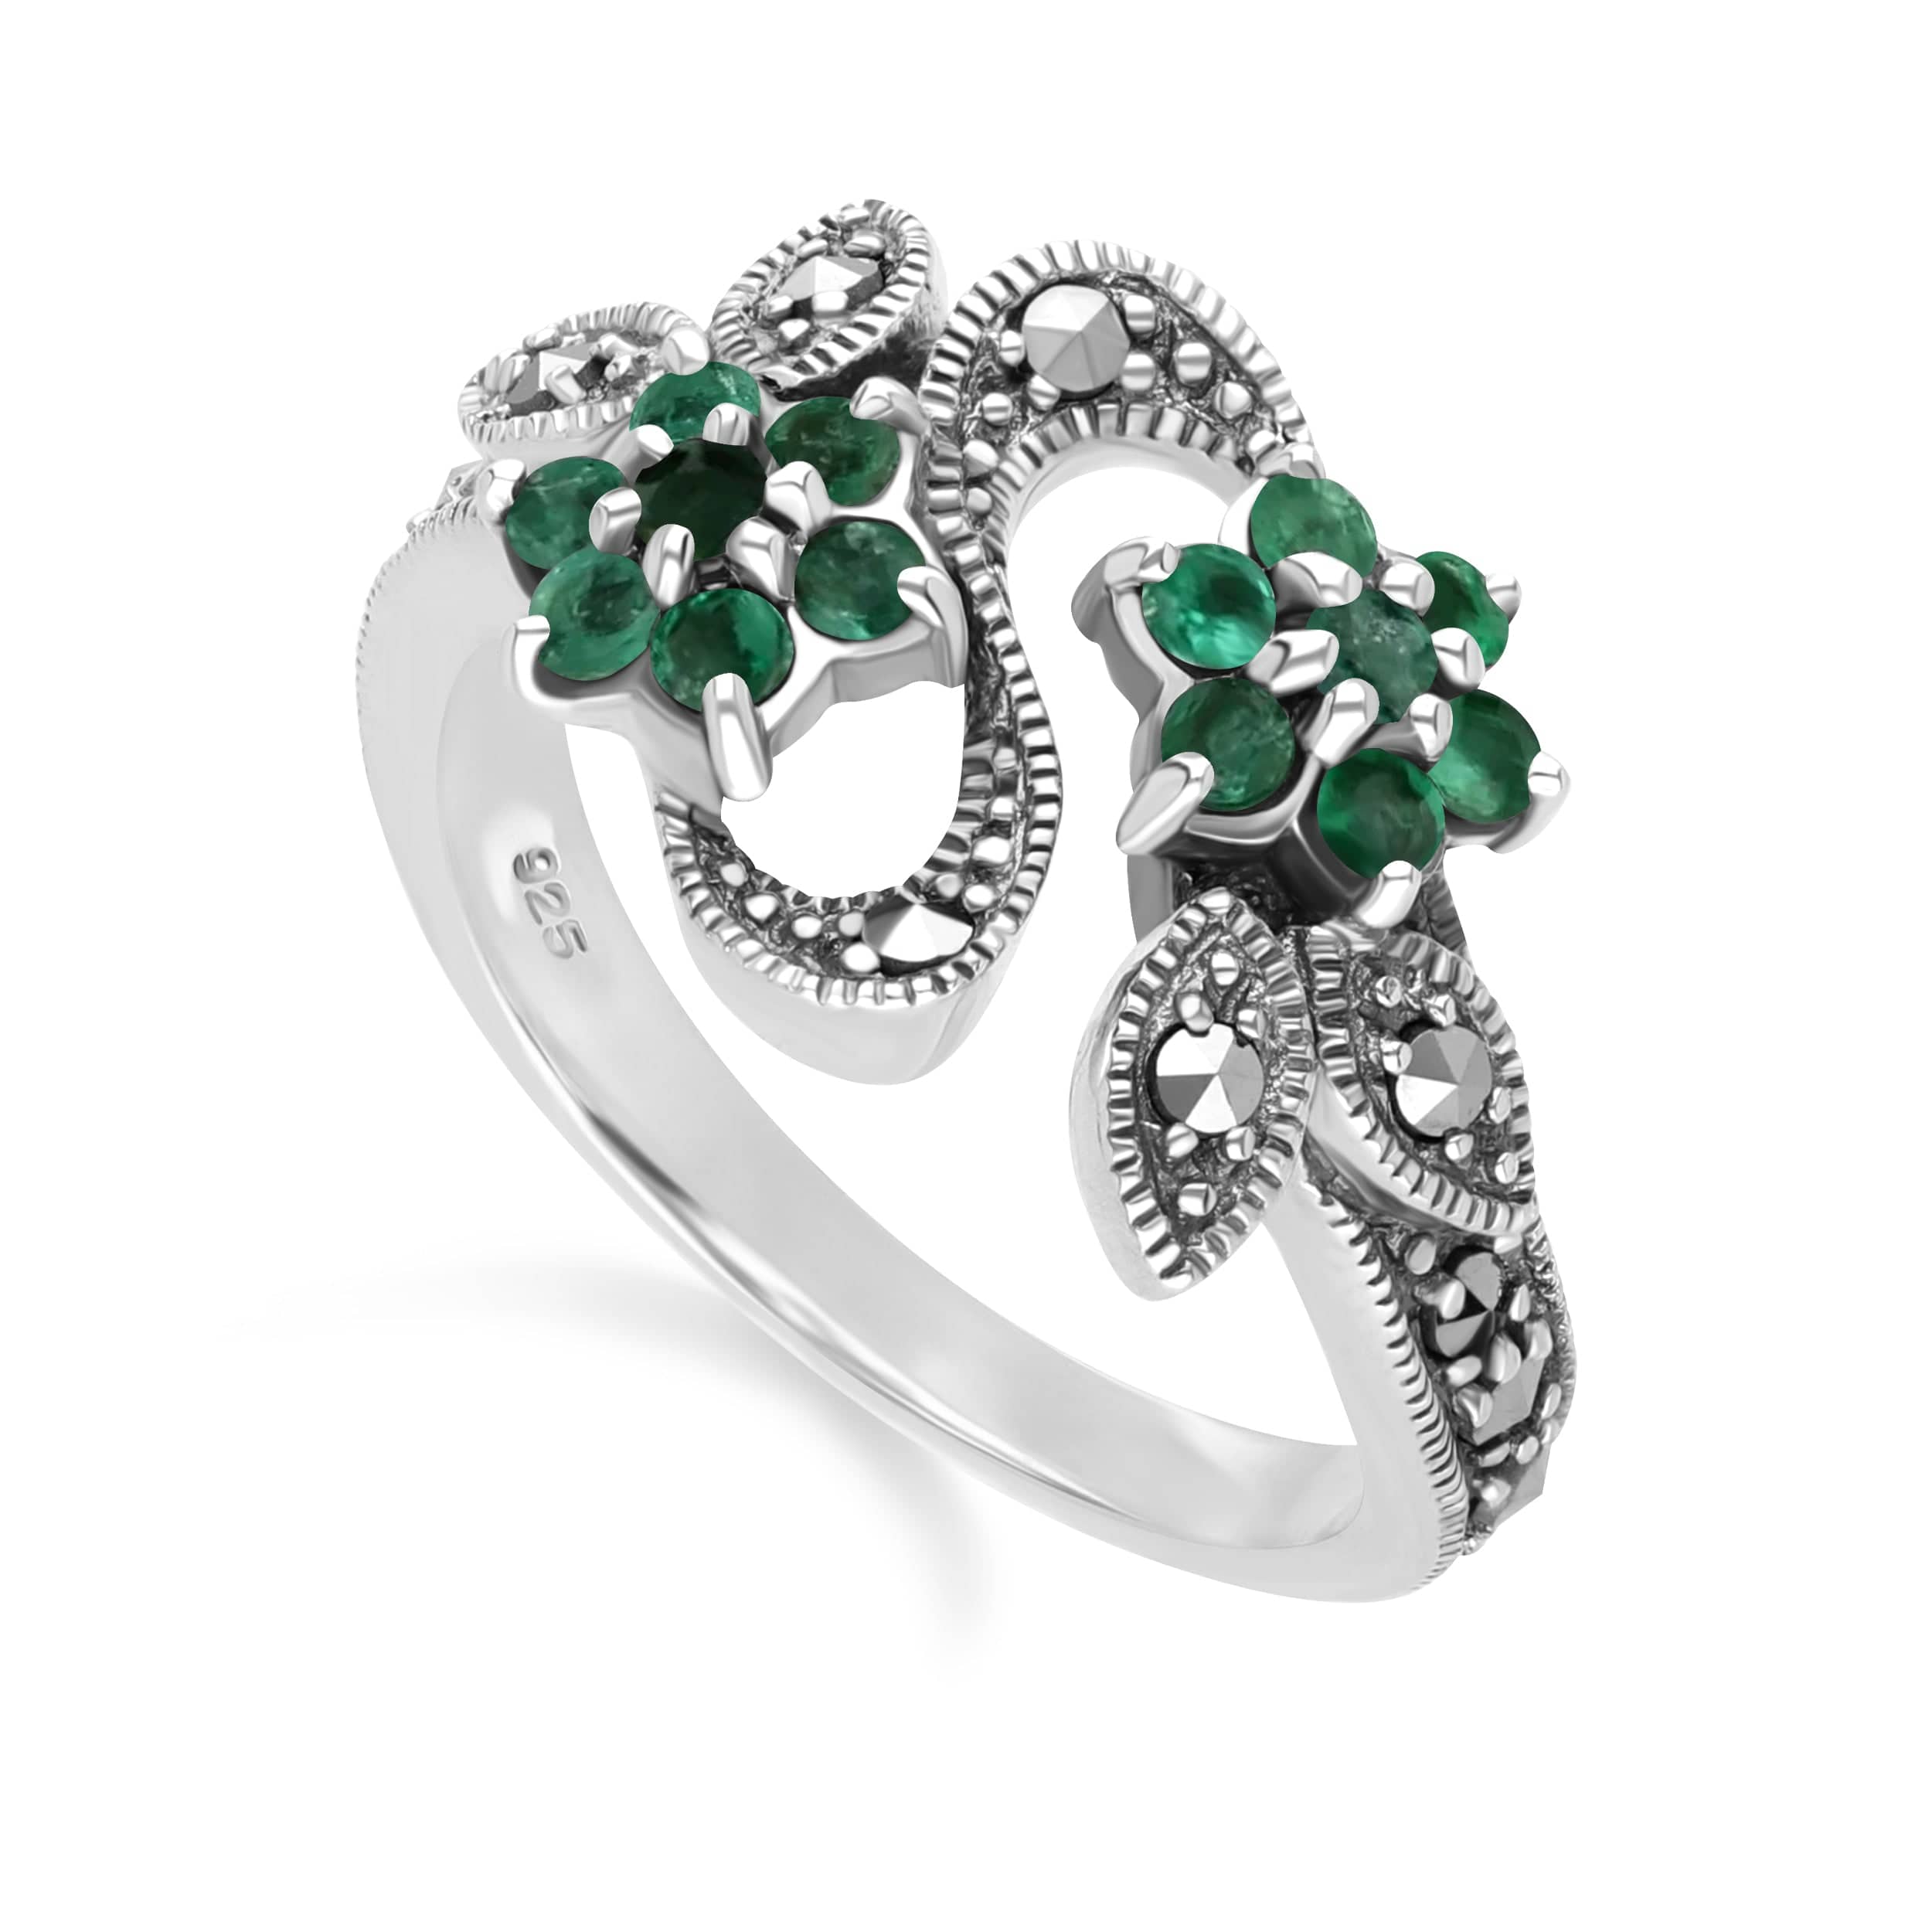 214R247402925 Art Nouveau Style Round Emerald & Marcasite Flower Ring in Sterling Silver 2